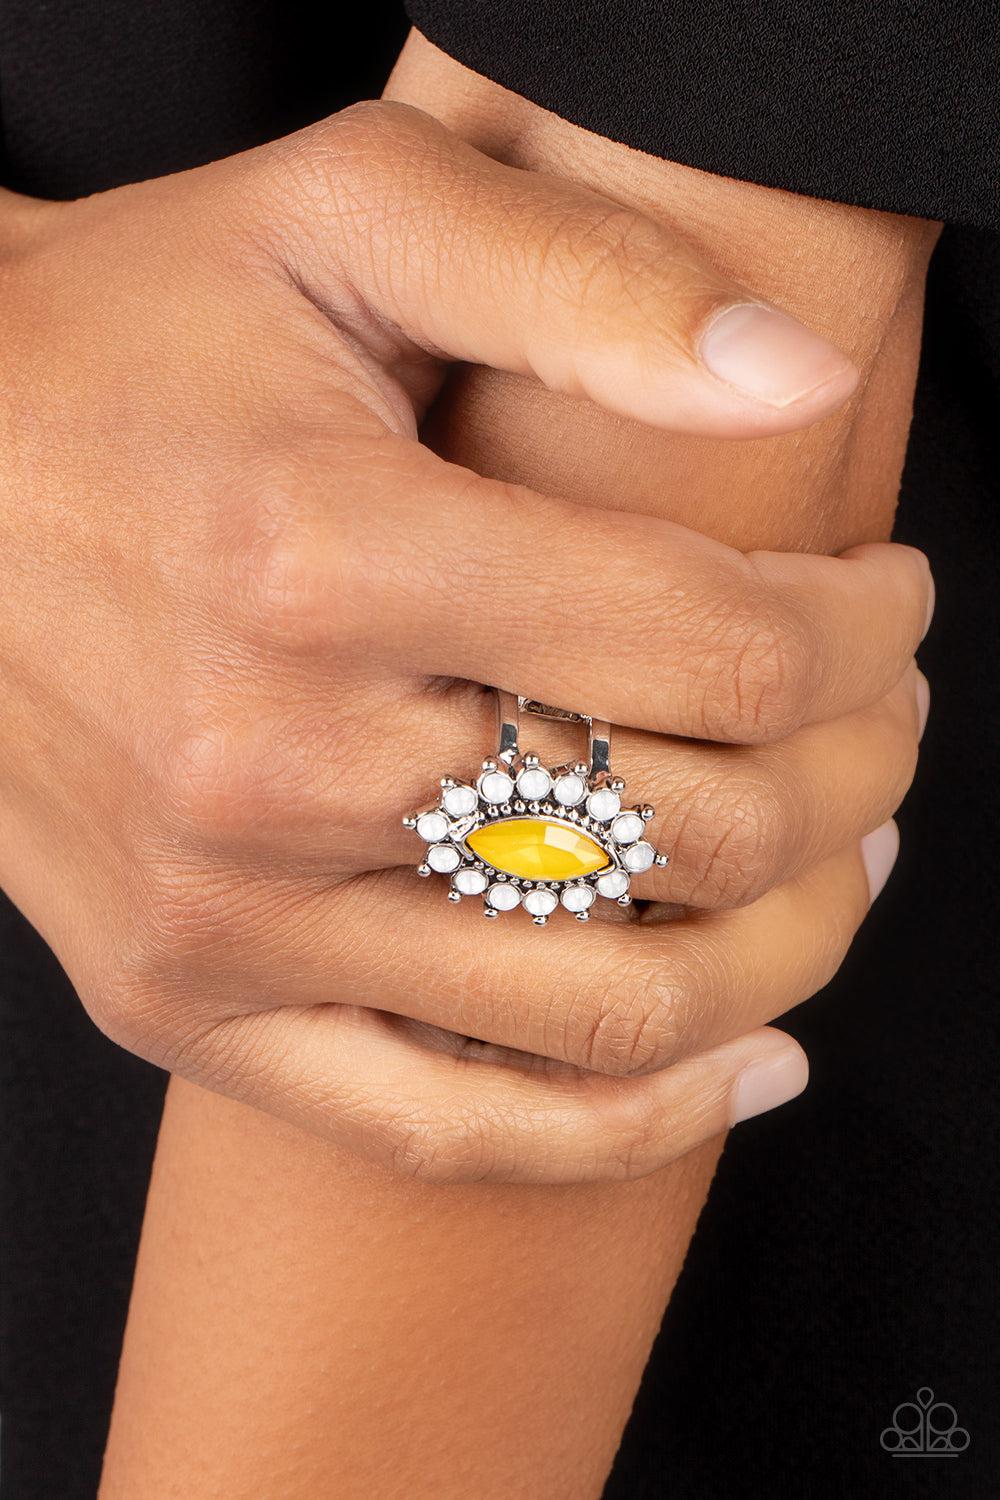 Everlasting Eden Yellow Gem Ring - Paparazzi Accessories- lightbox - CarasShop.com - $5 Jewelry by Cara Jewels